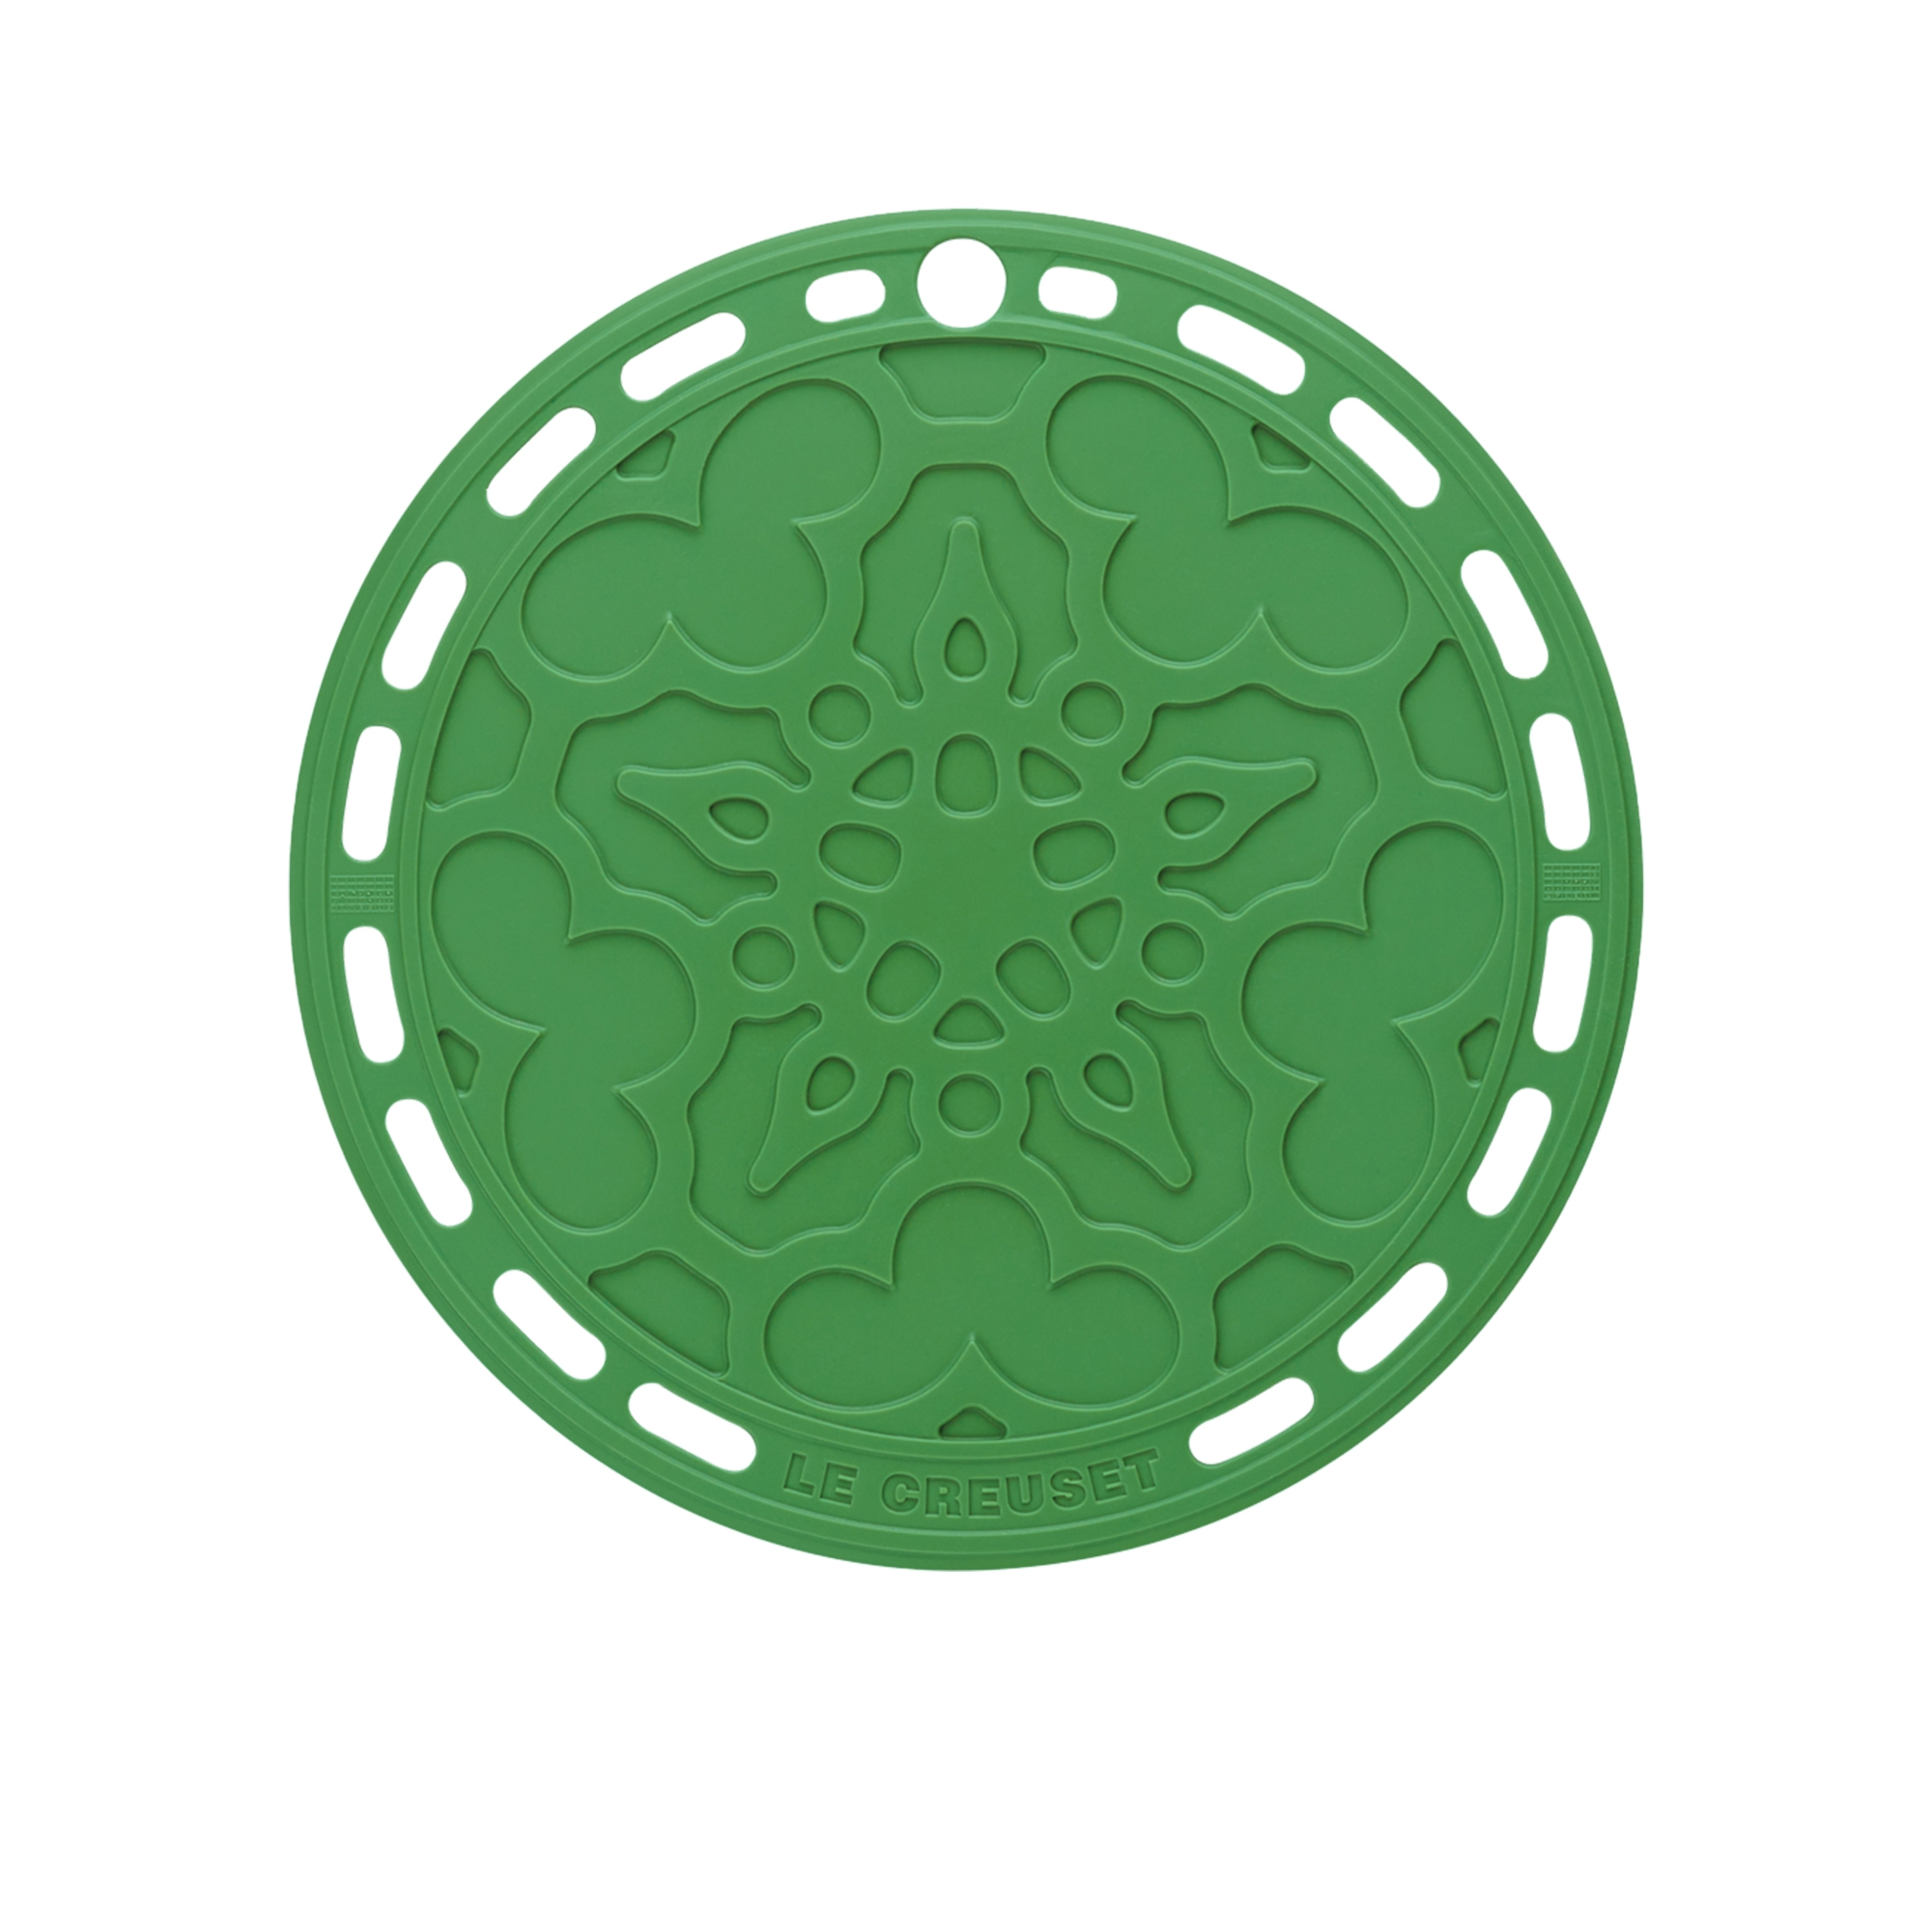 Le Creuset Heritage Silicone Trivet 20cm Bamboo Green Image 1